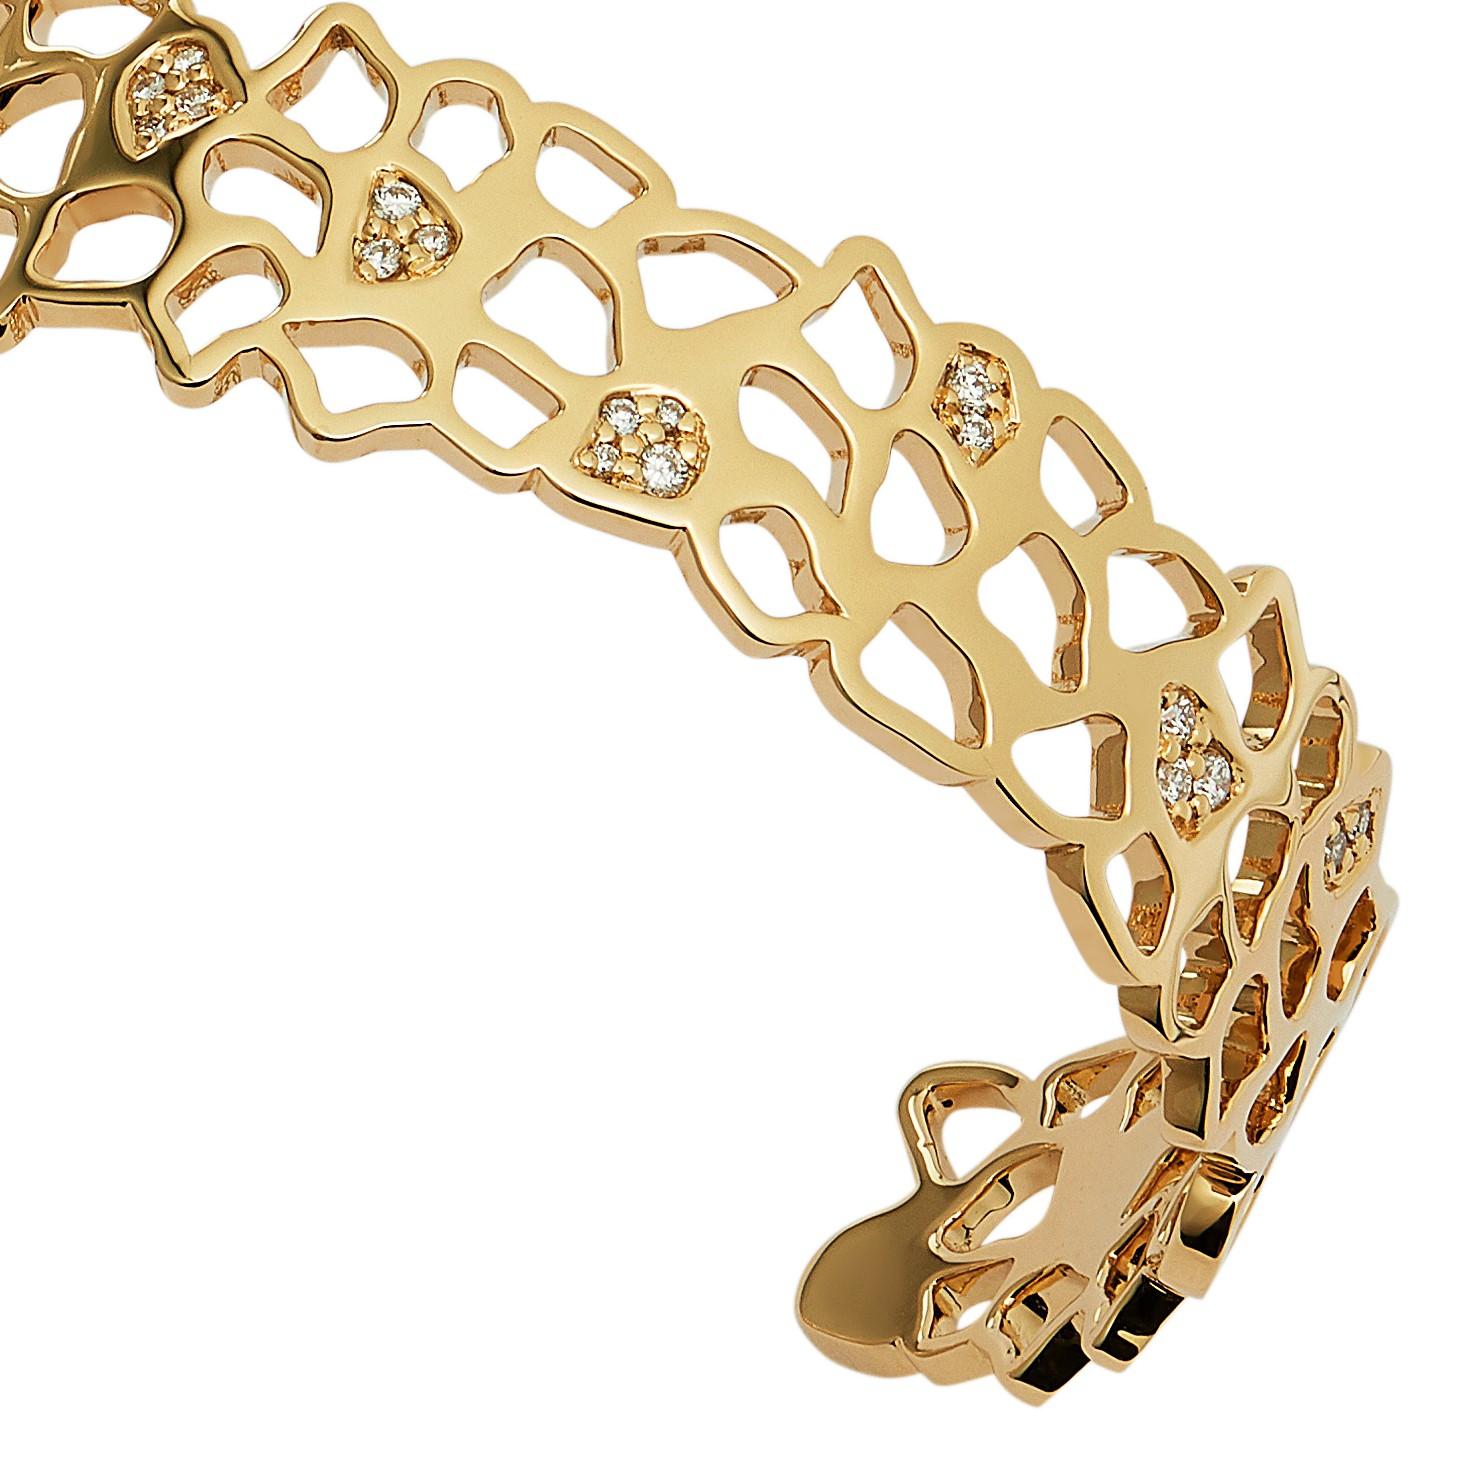 18 Karat Yellow Gold Cuff Bracelet Set With Diamonds

This eye-catching yellow gold cuff is perfect for everyday wear and will no doubt attract attention. Part of the Twiga collection, it features intricate detail resembling the giraffe's spots and